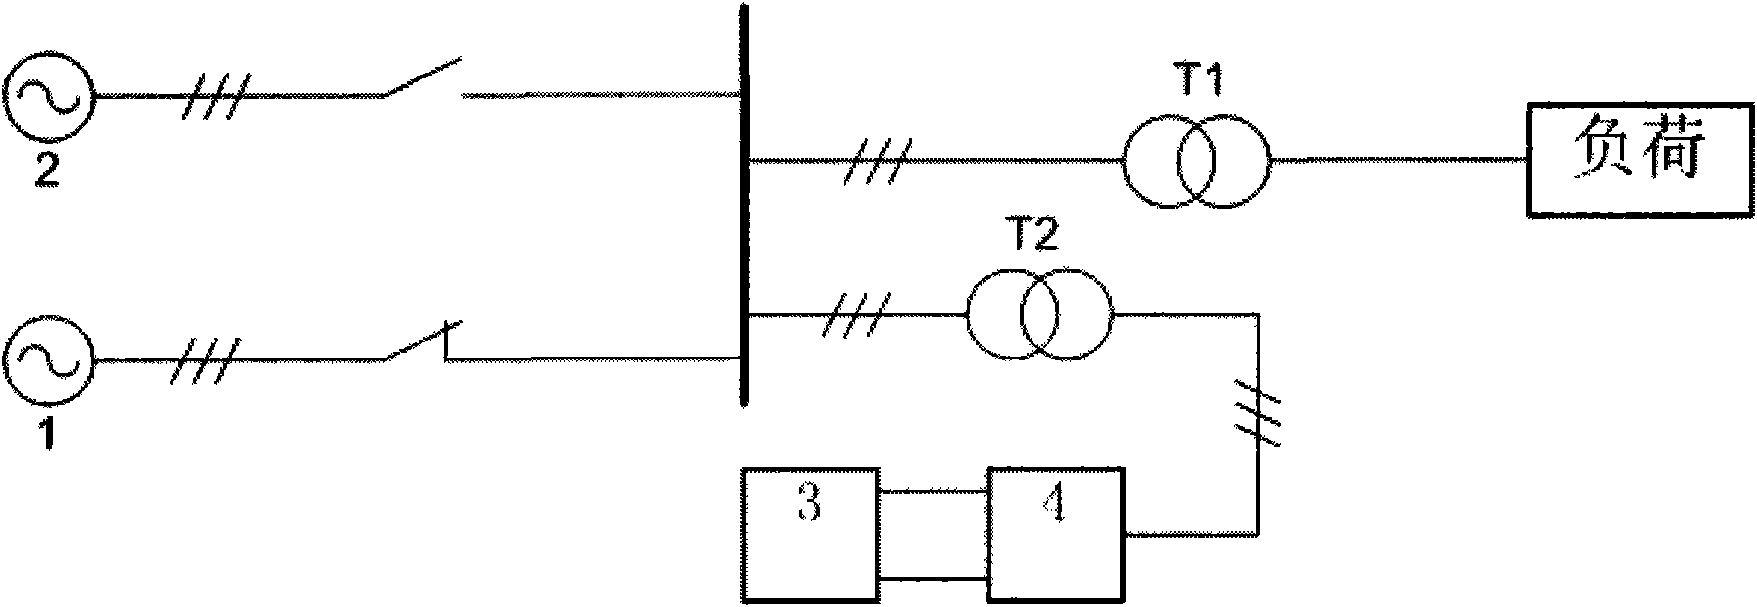 Voltage and power regulator based on the composite energy storage of storage battery and super capacitor